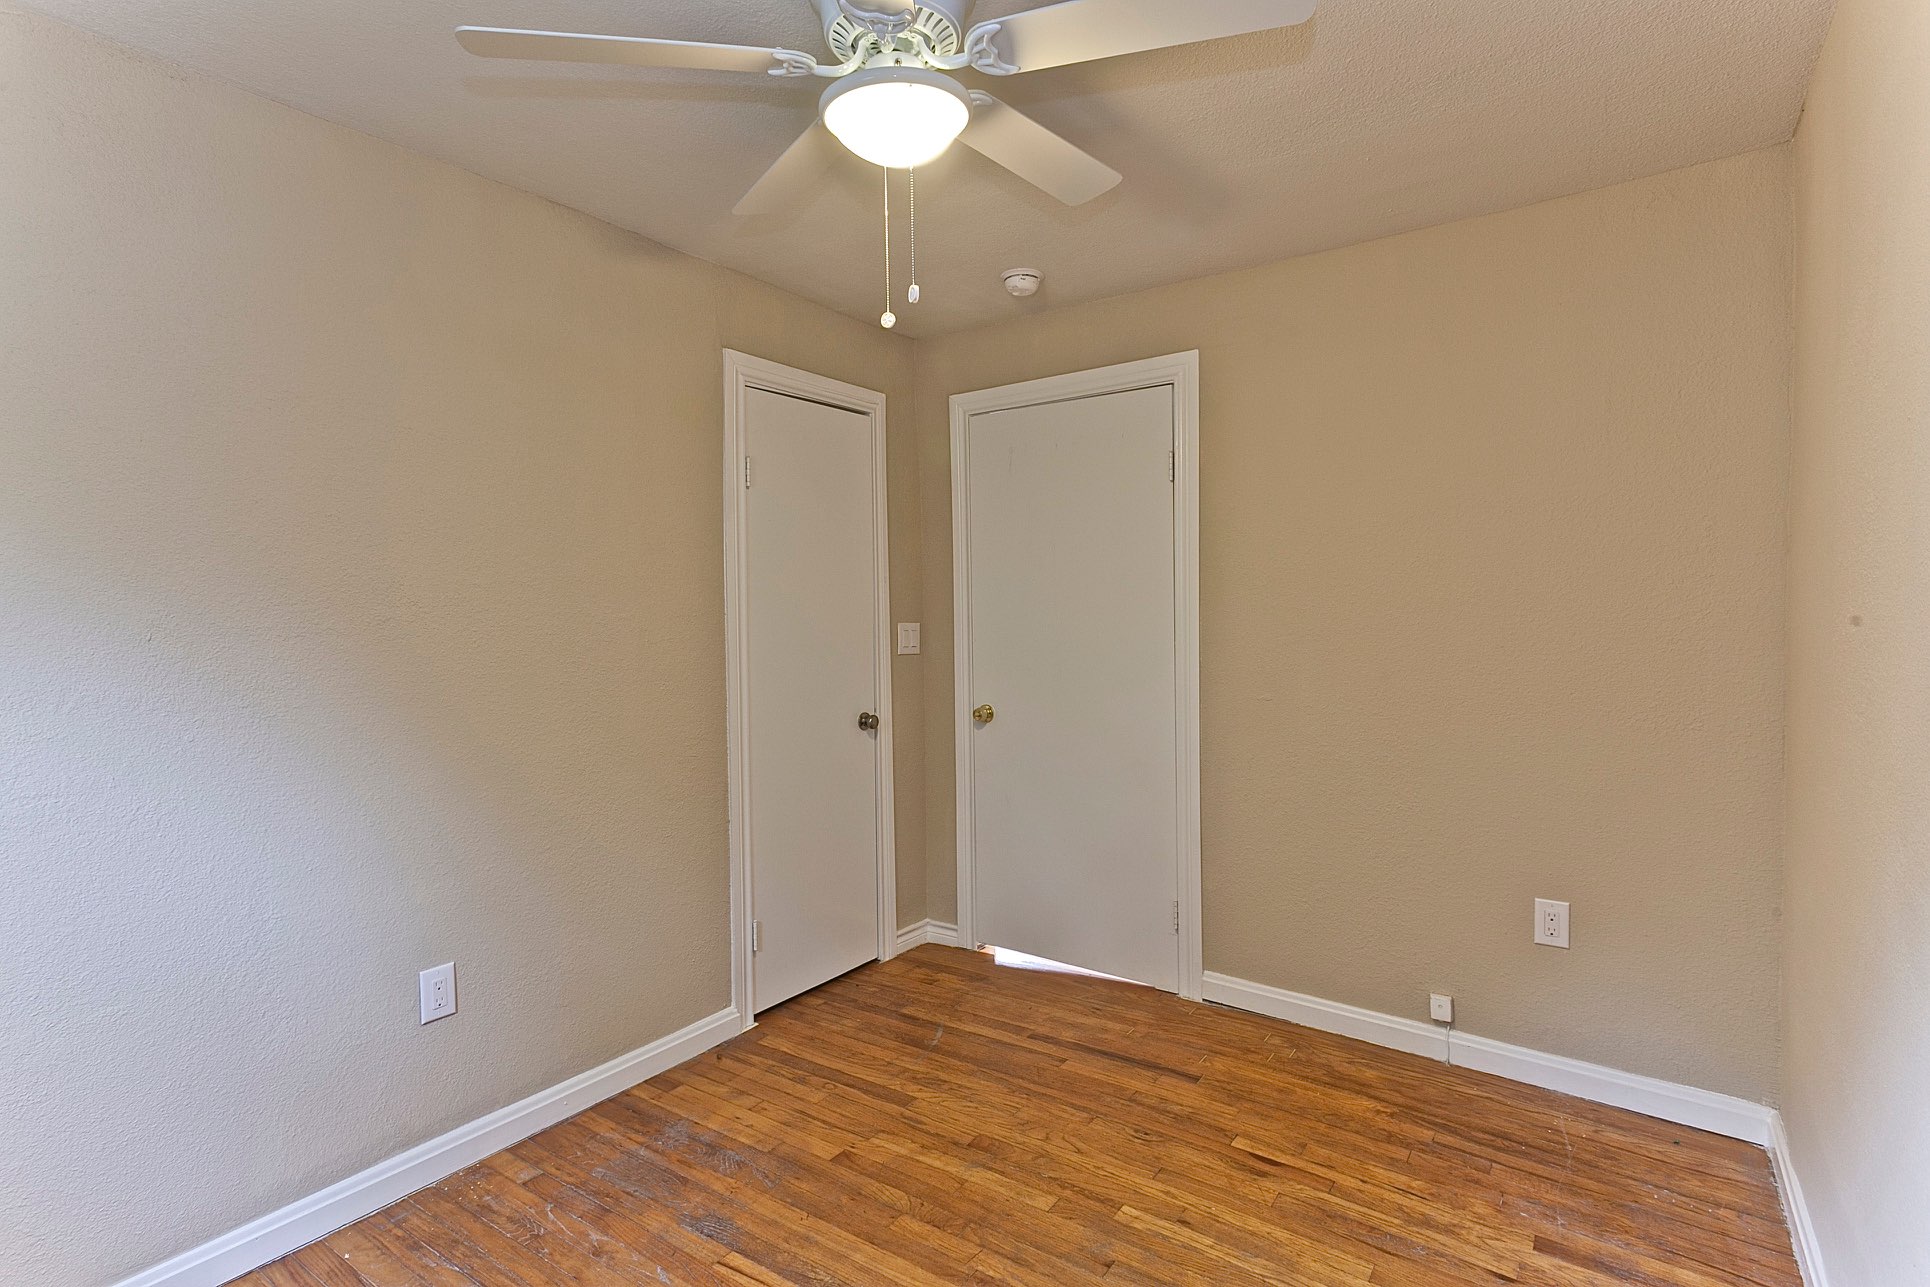 an empty room with wooden floors, ceiling fan and white doors